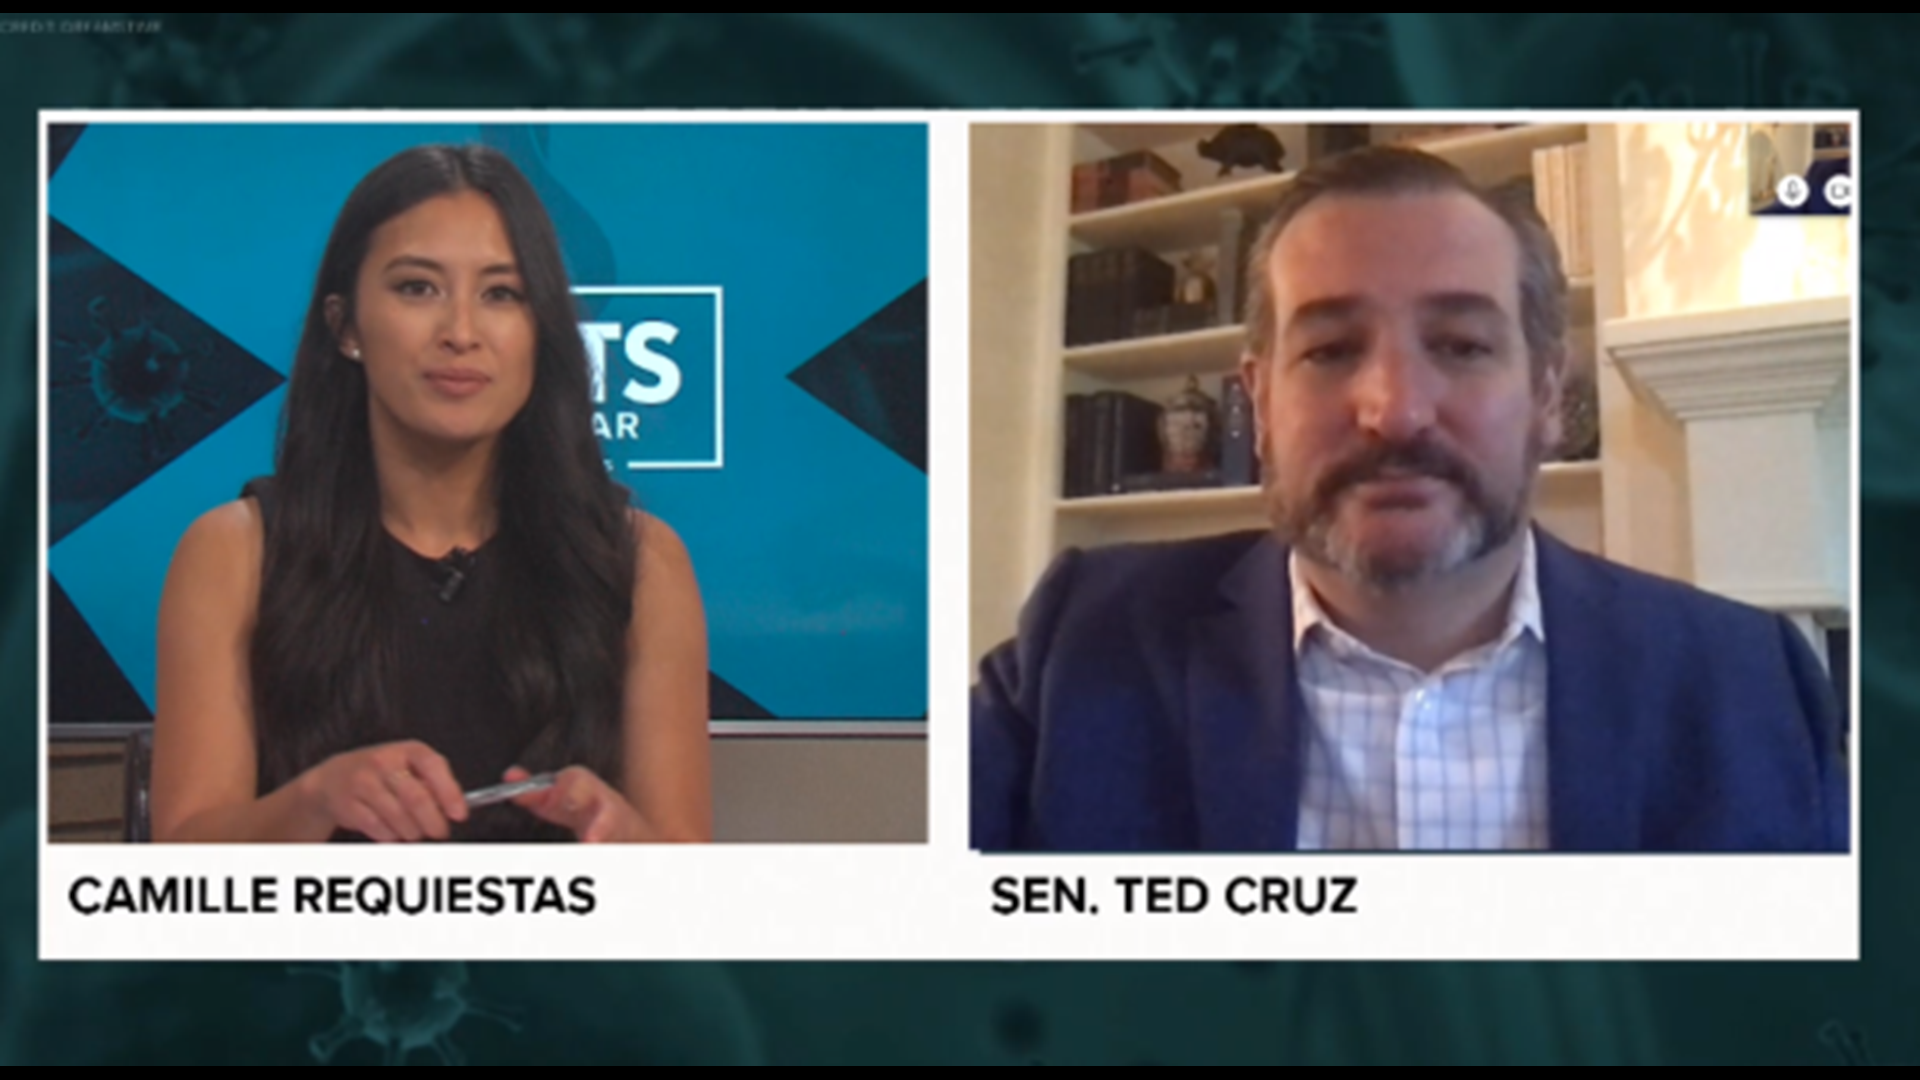 Our Camille Requiestas spoke to Sen. Ted Cruz about how the country can come together during the COVID-19 pandemic.